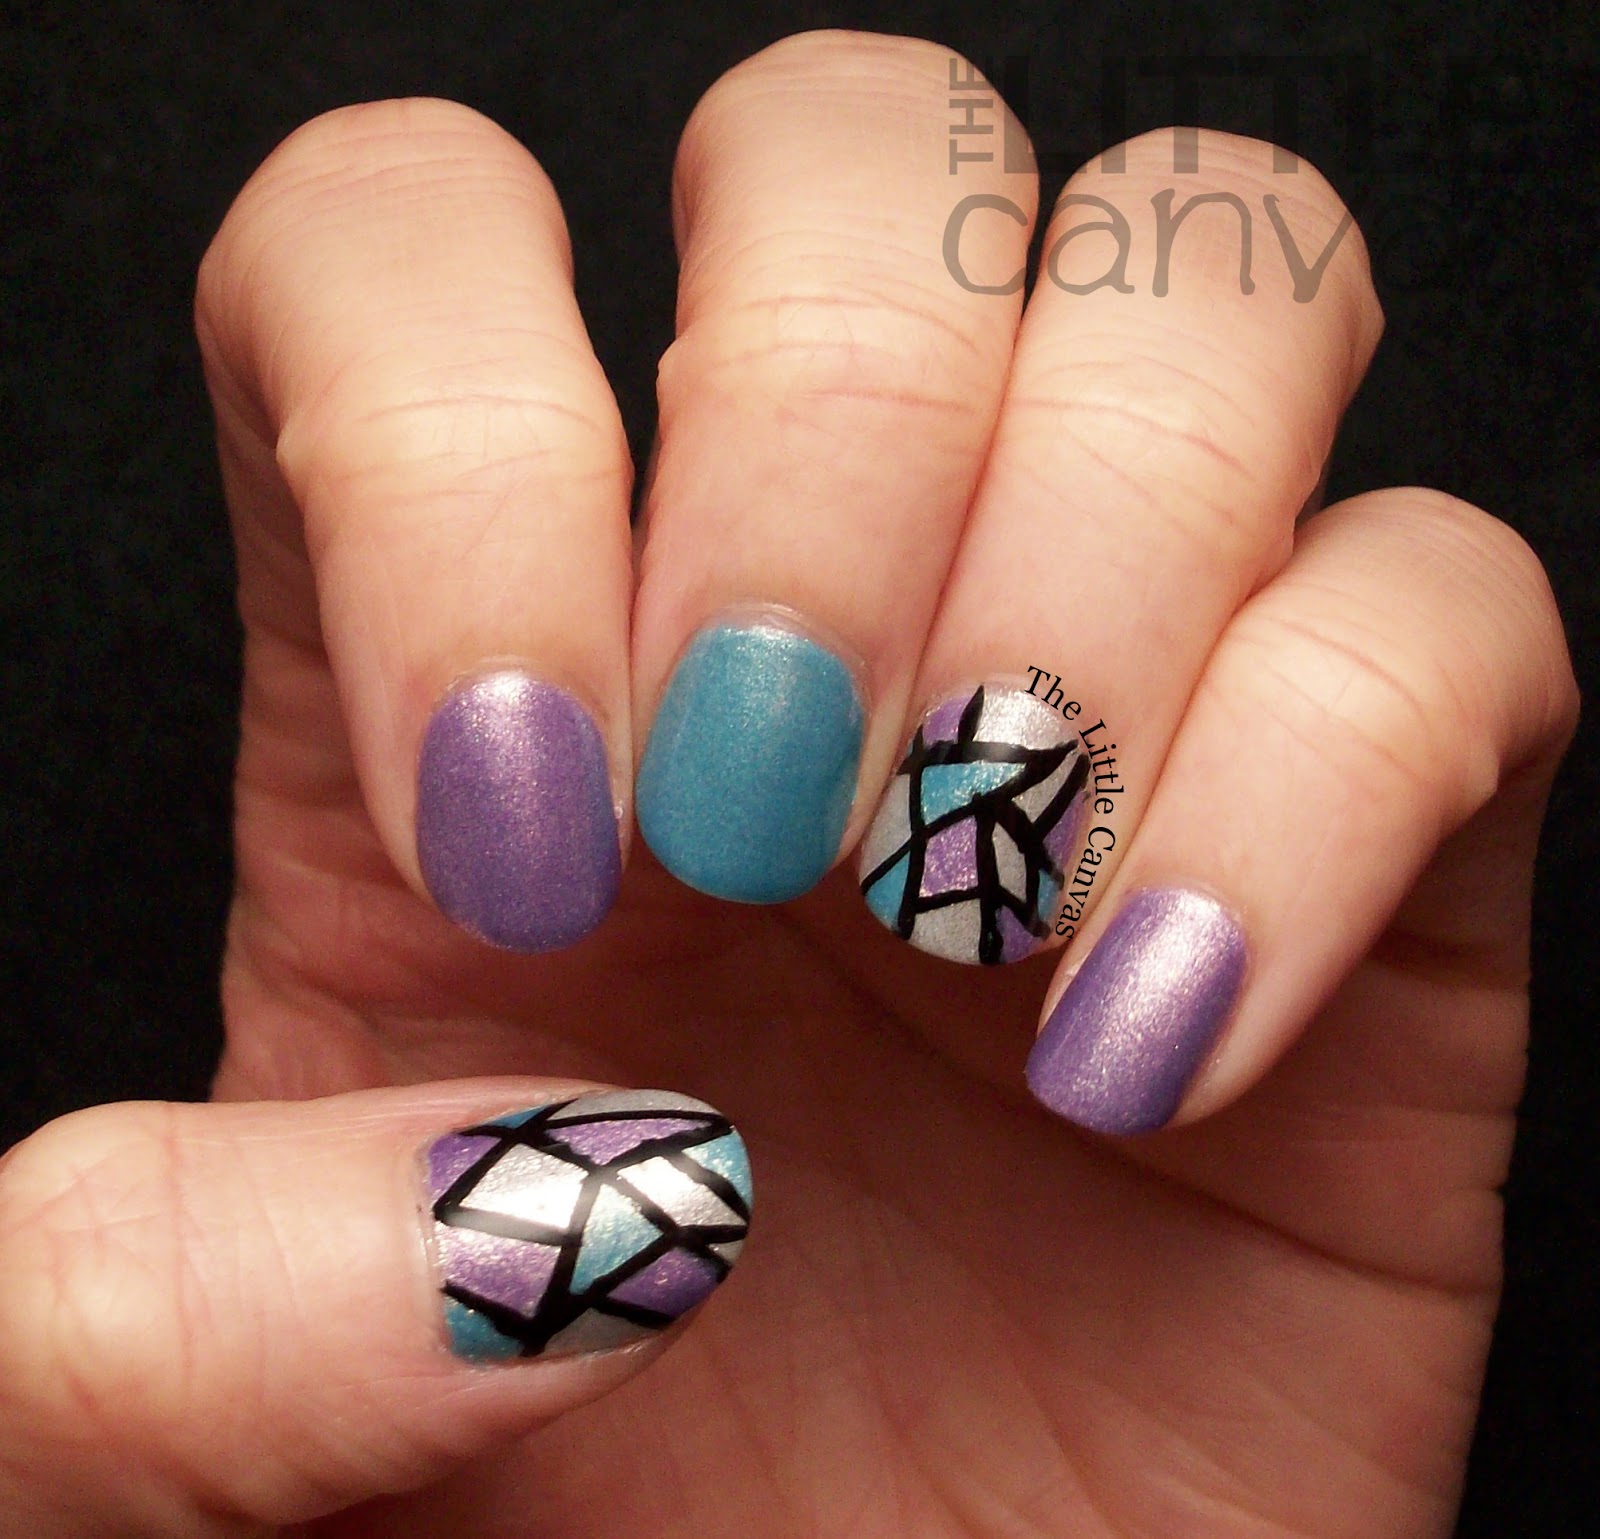 Zoya Hudson, Rebel, and Seraphina Nail Art - The Little Canvas